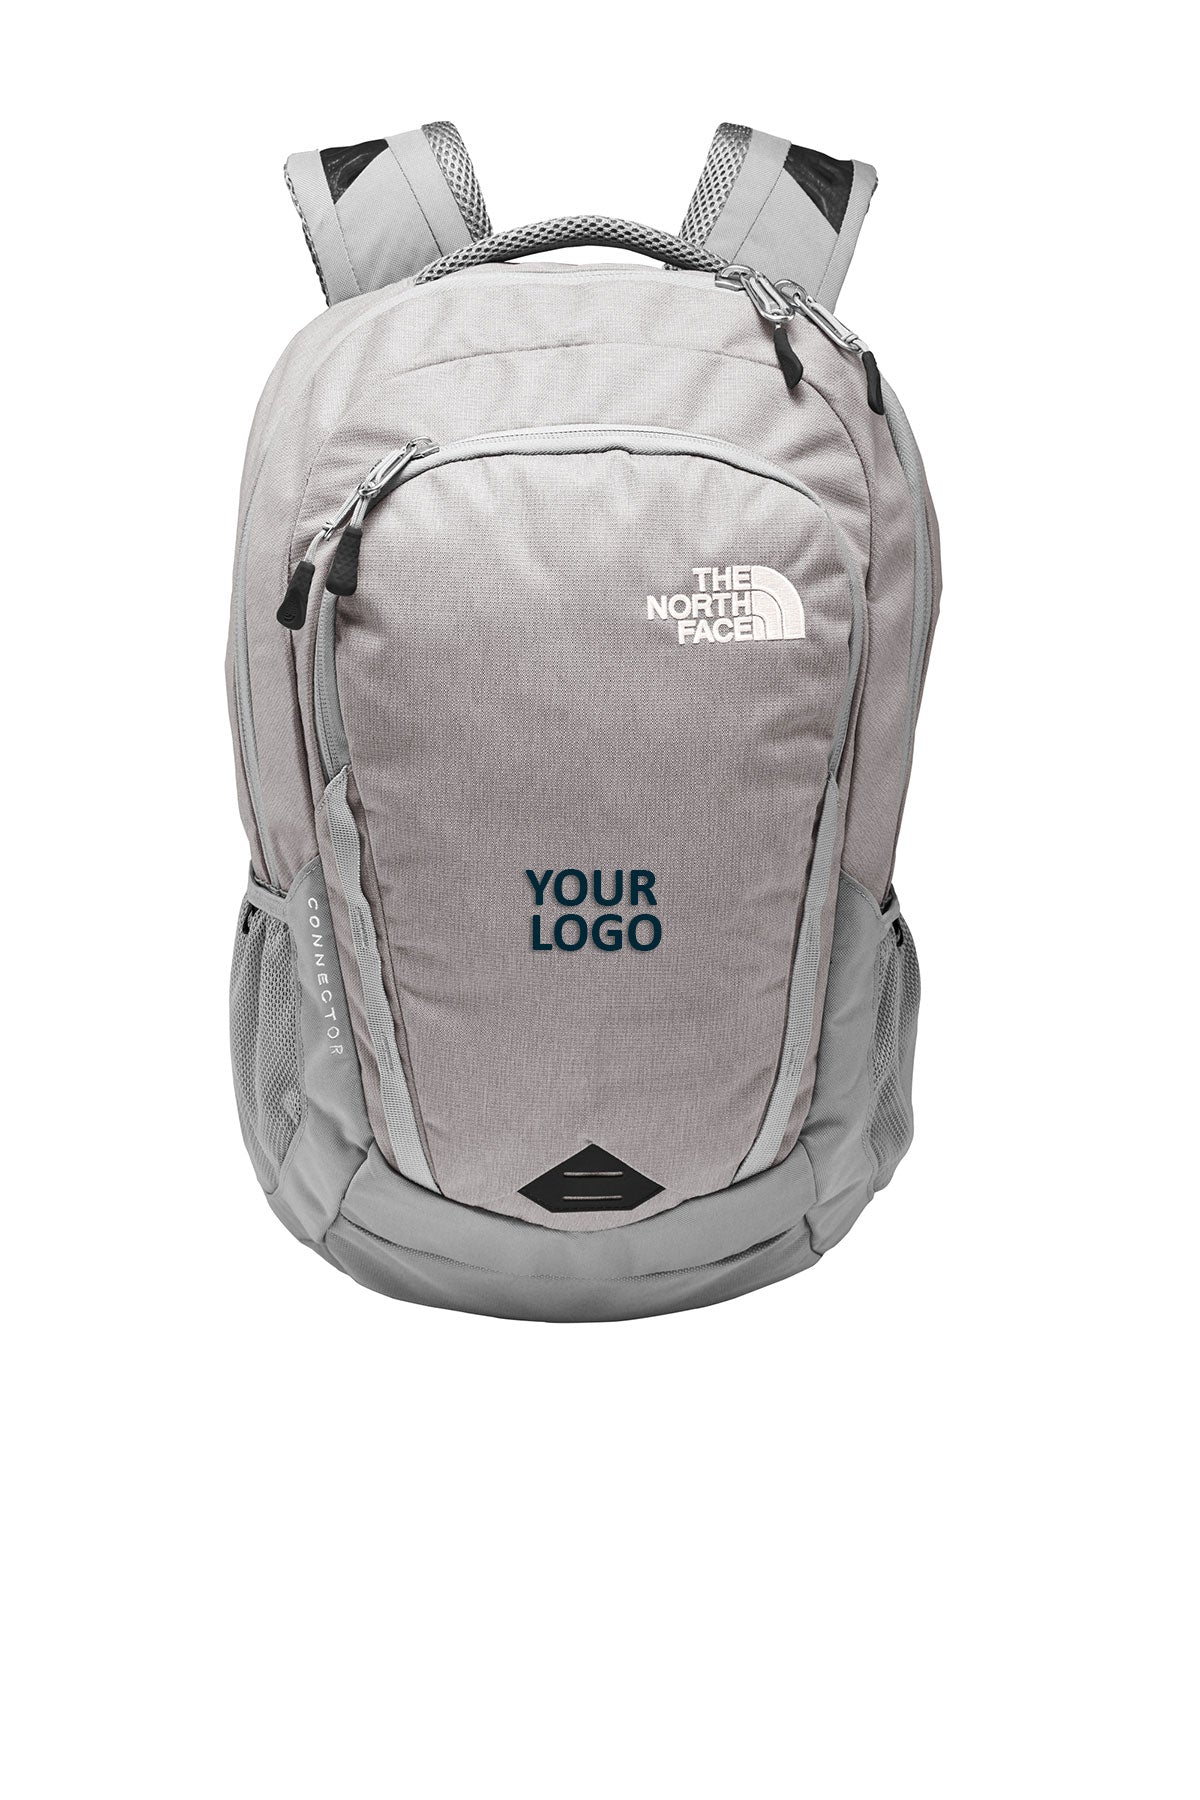 the north face connector backpack nf0a3kx8 mid grey dark heather mid grey